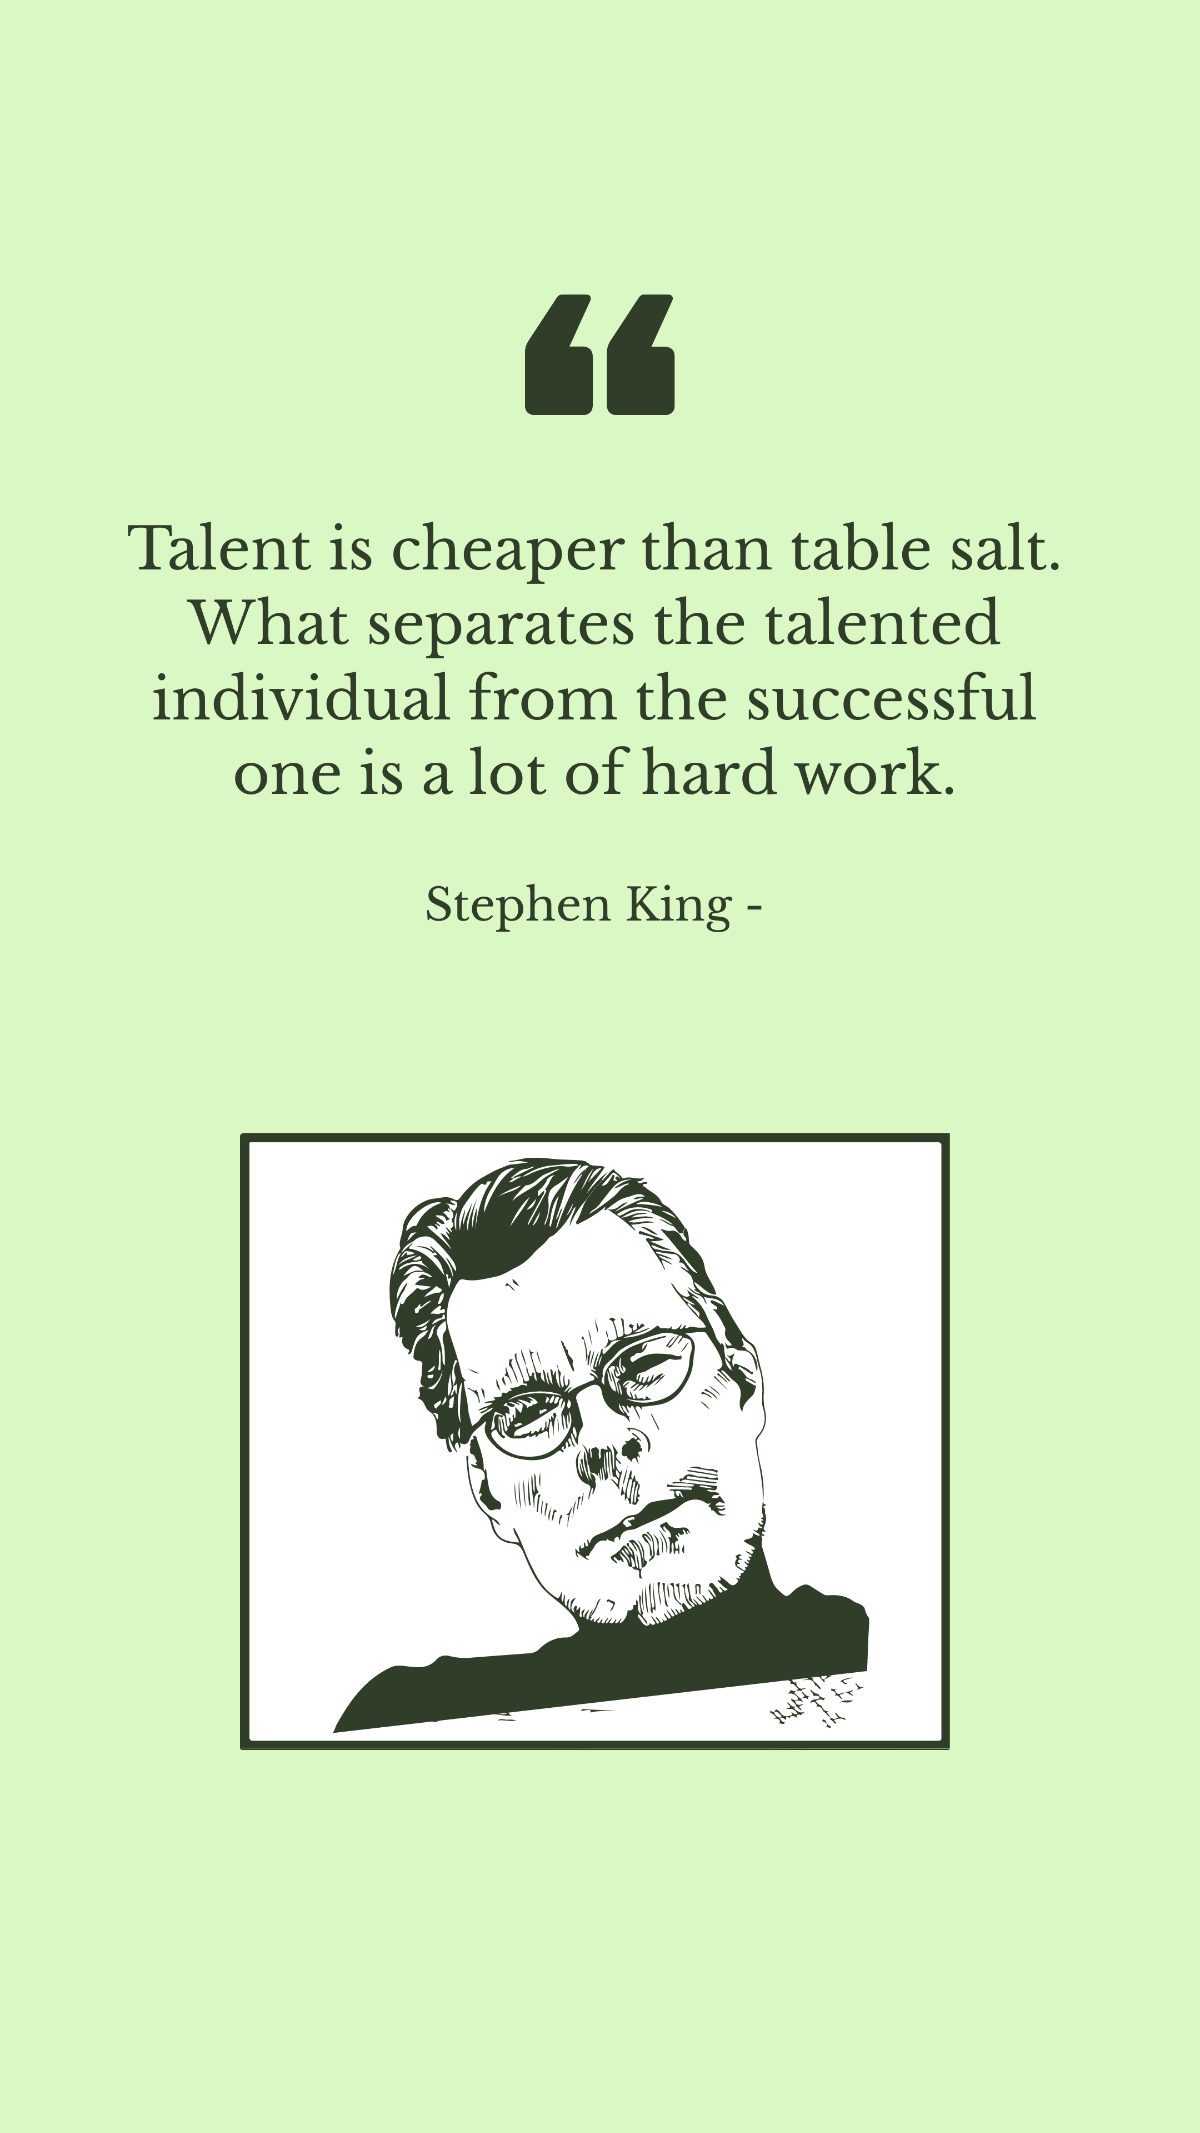 Stephen King - Talent is cheaper than table salt. What separates the talented individual from the successful one is a lot of hard work.